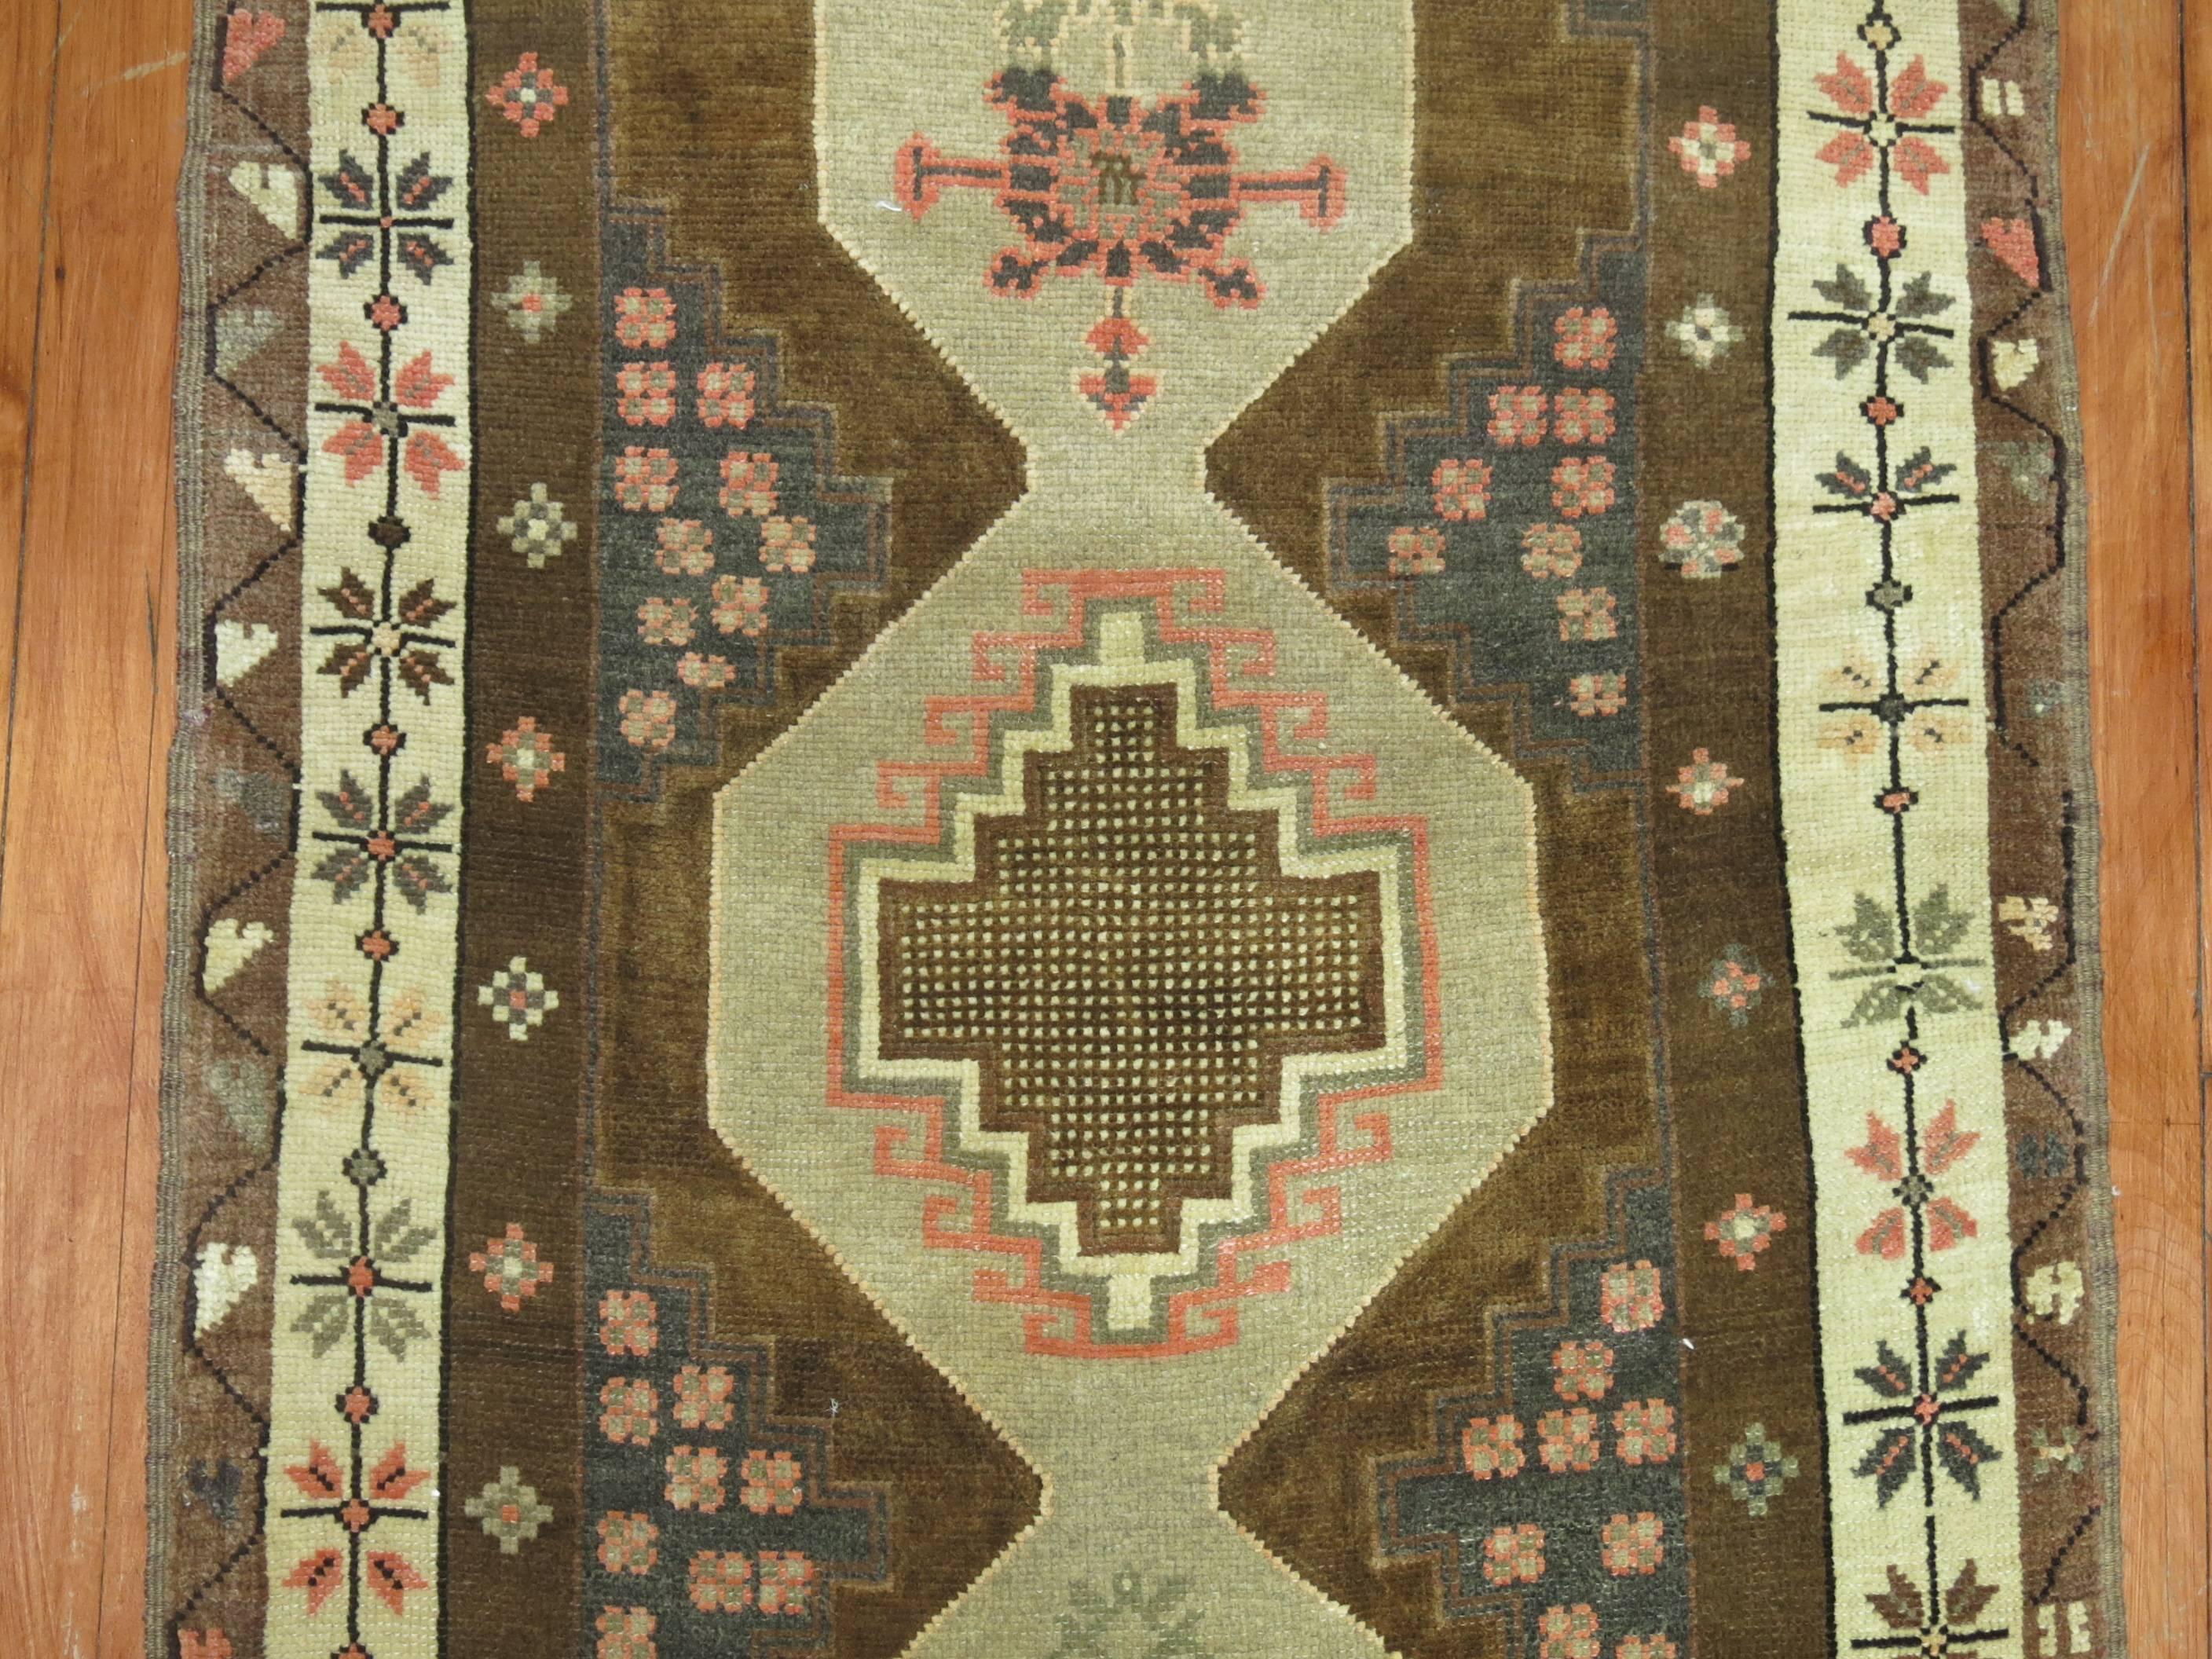 A vintage Turkish Oushak runner in predominantly brown with some accents in pink.